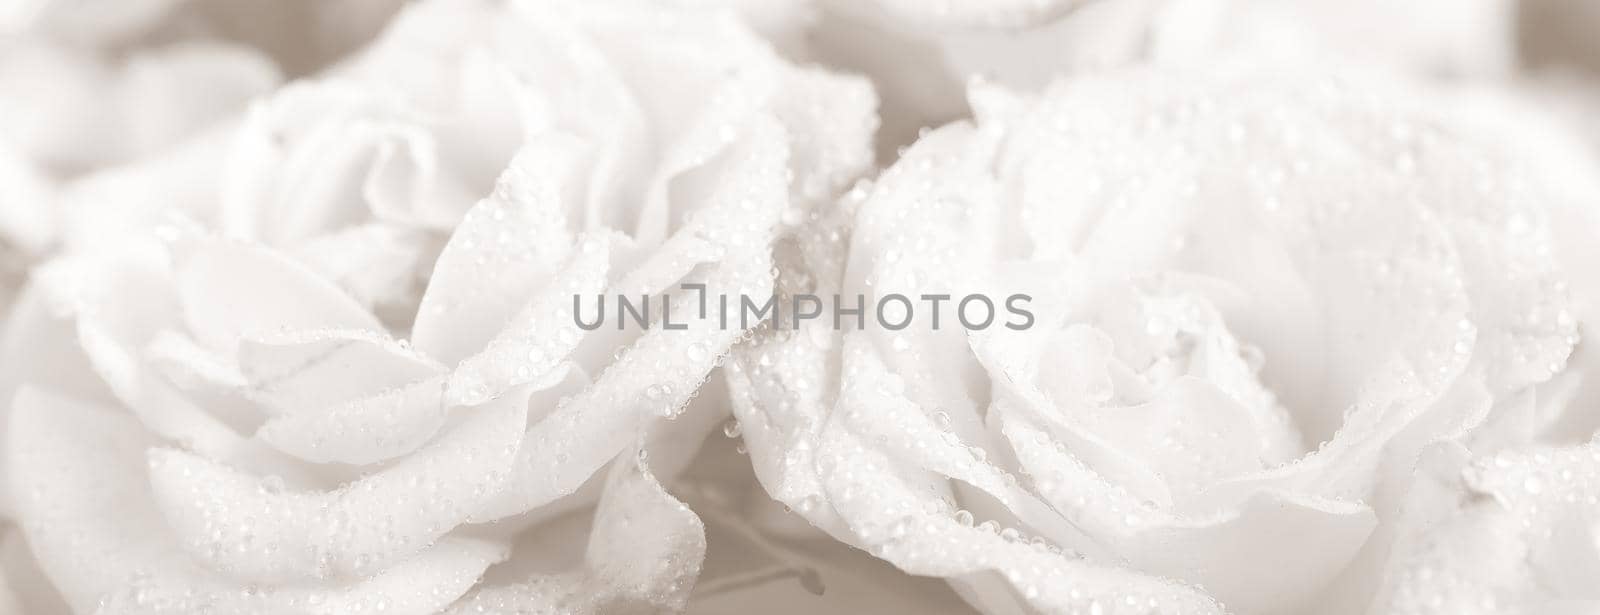 Floral background and texture. Roses with water drops on petals. Image in a light gray tone